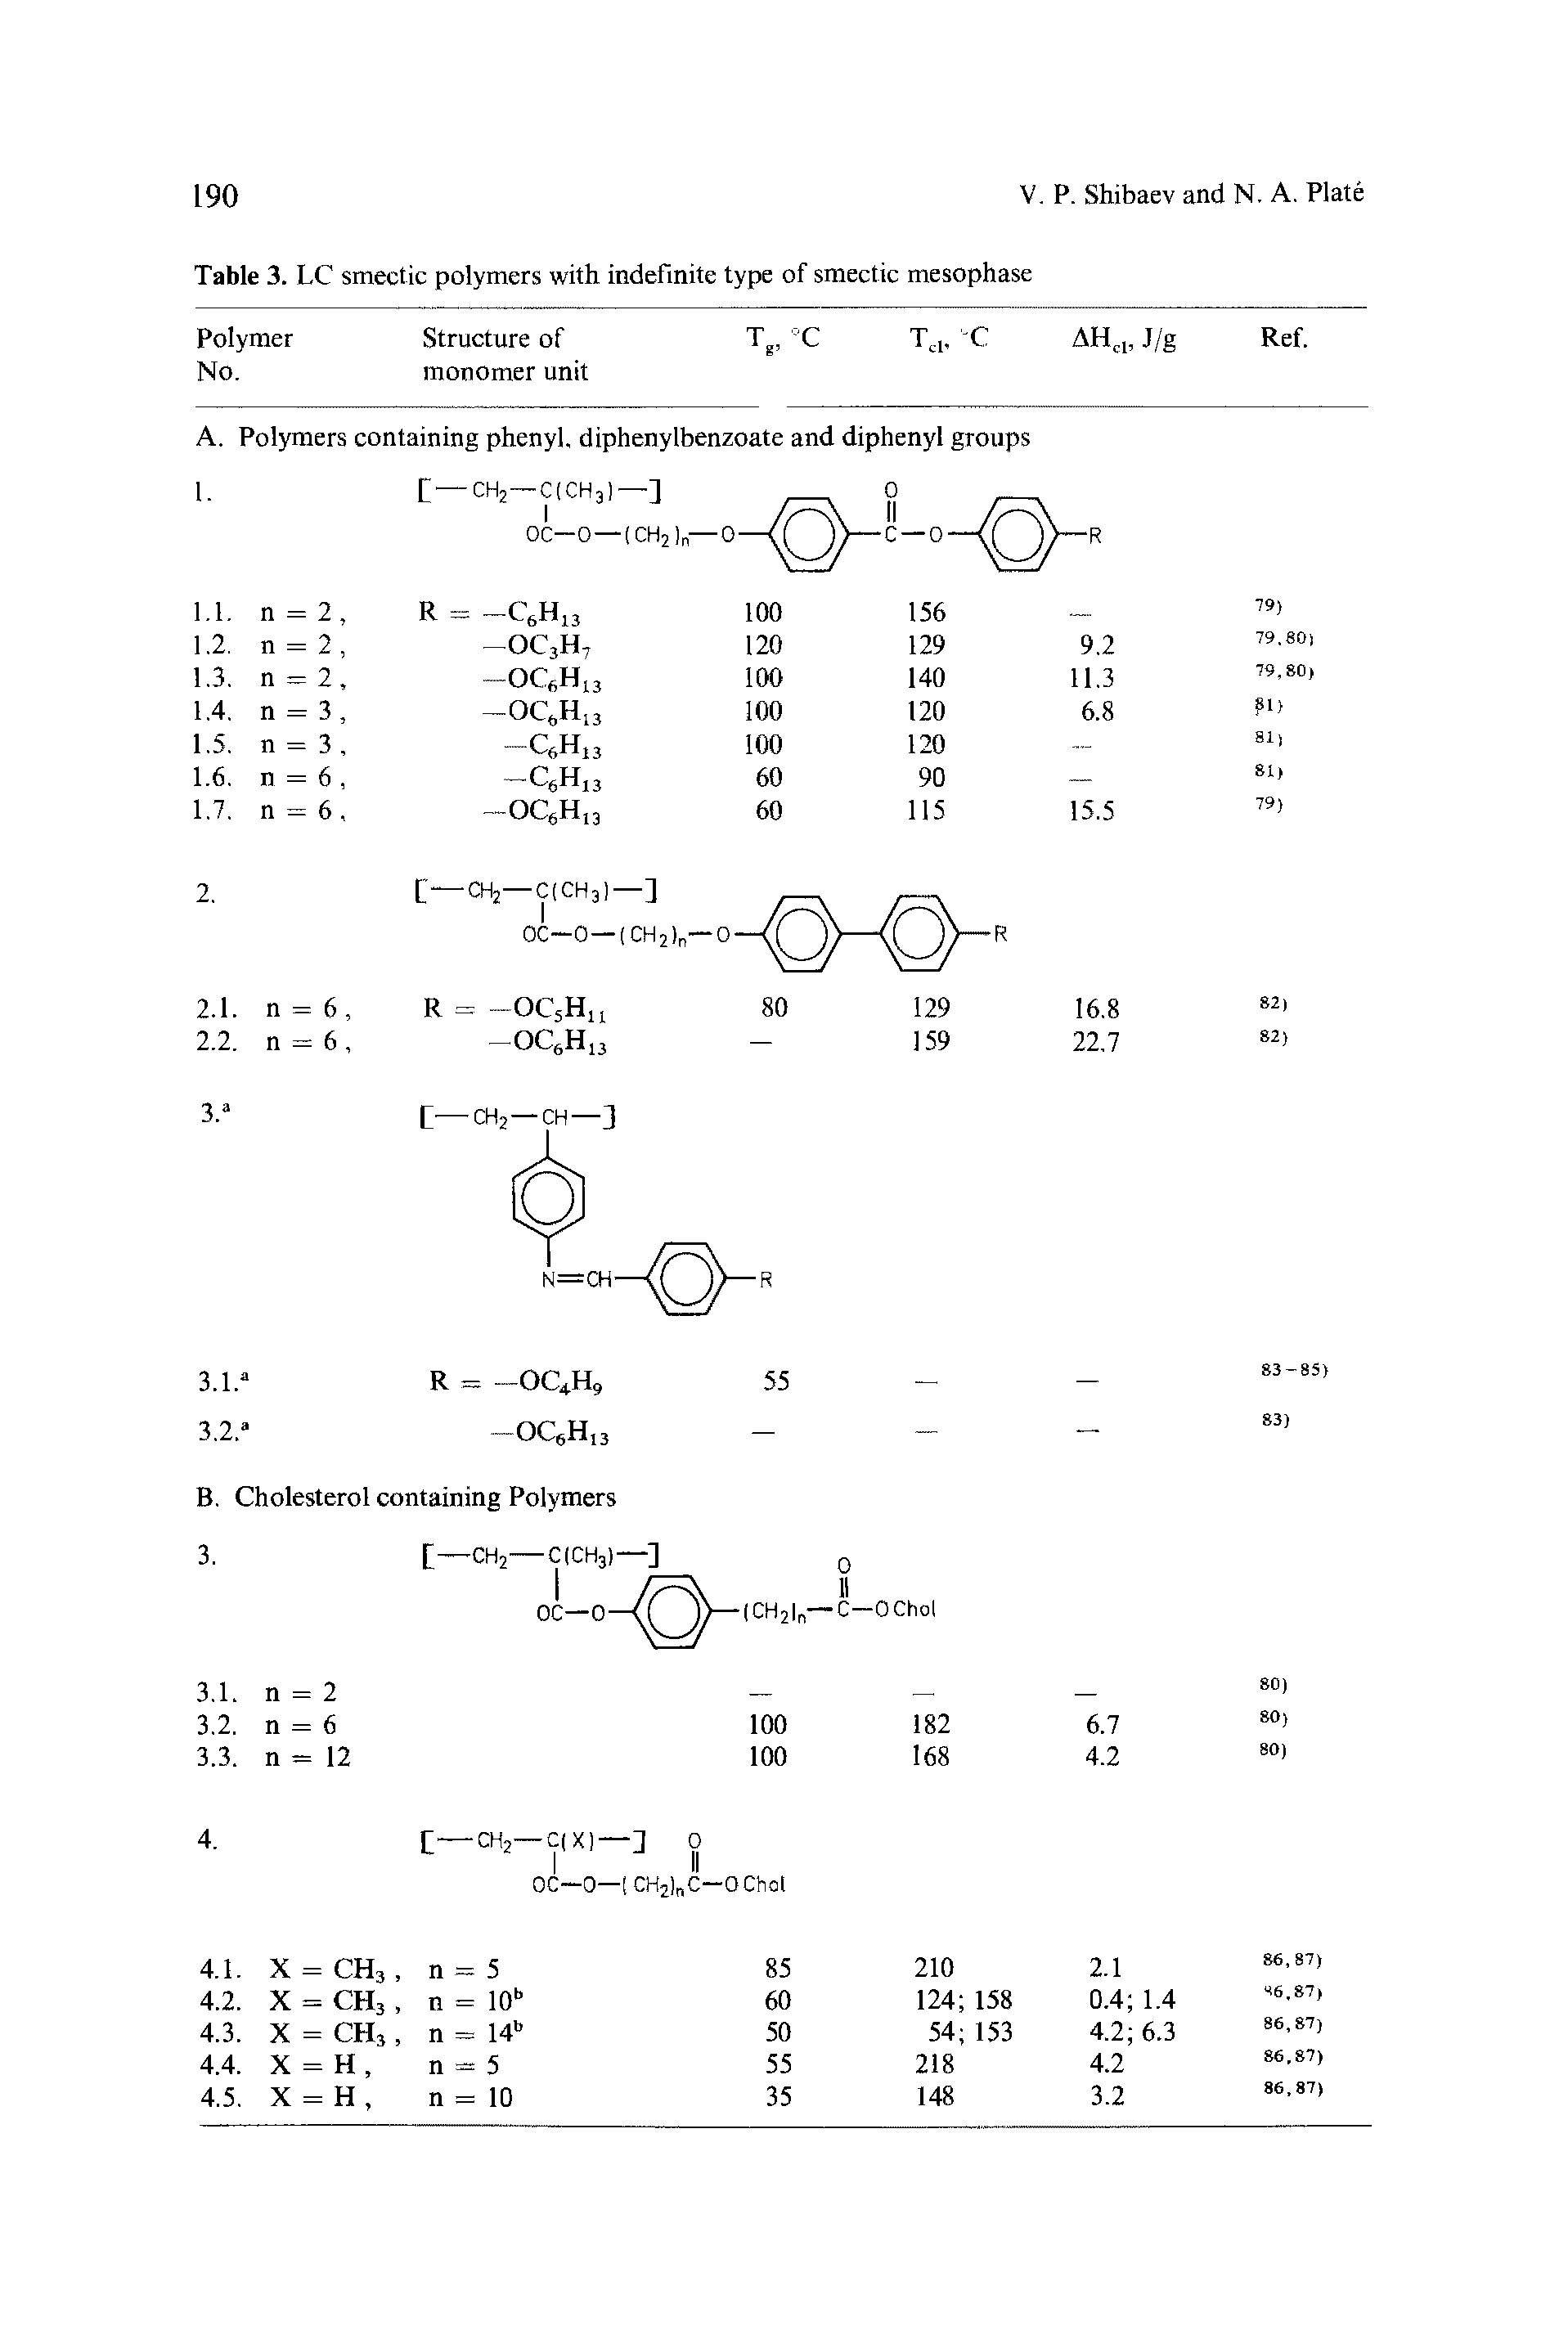 Table 3. LC smectic polymers with indefinite type of smectic mesophase...